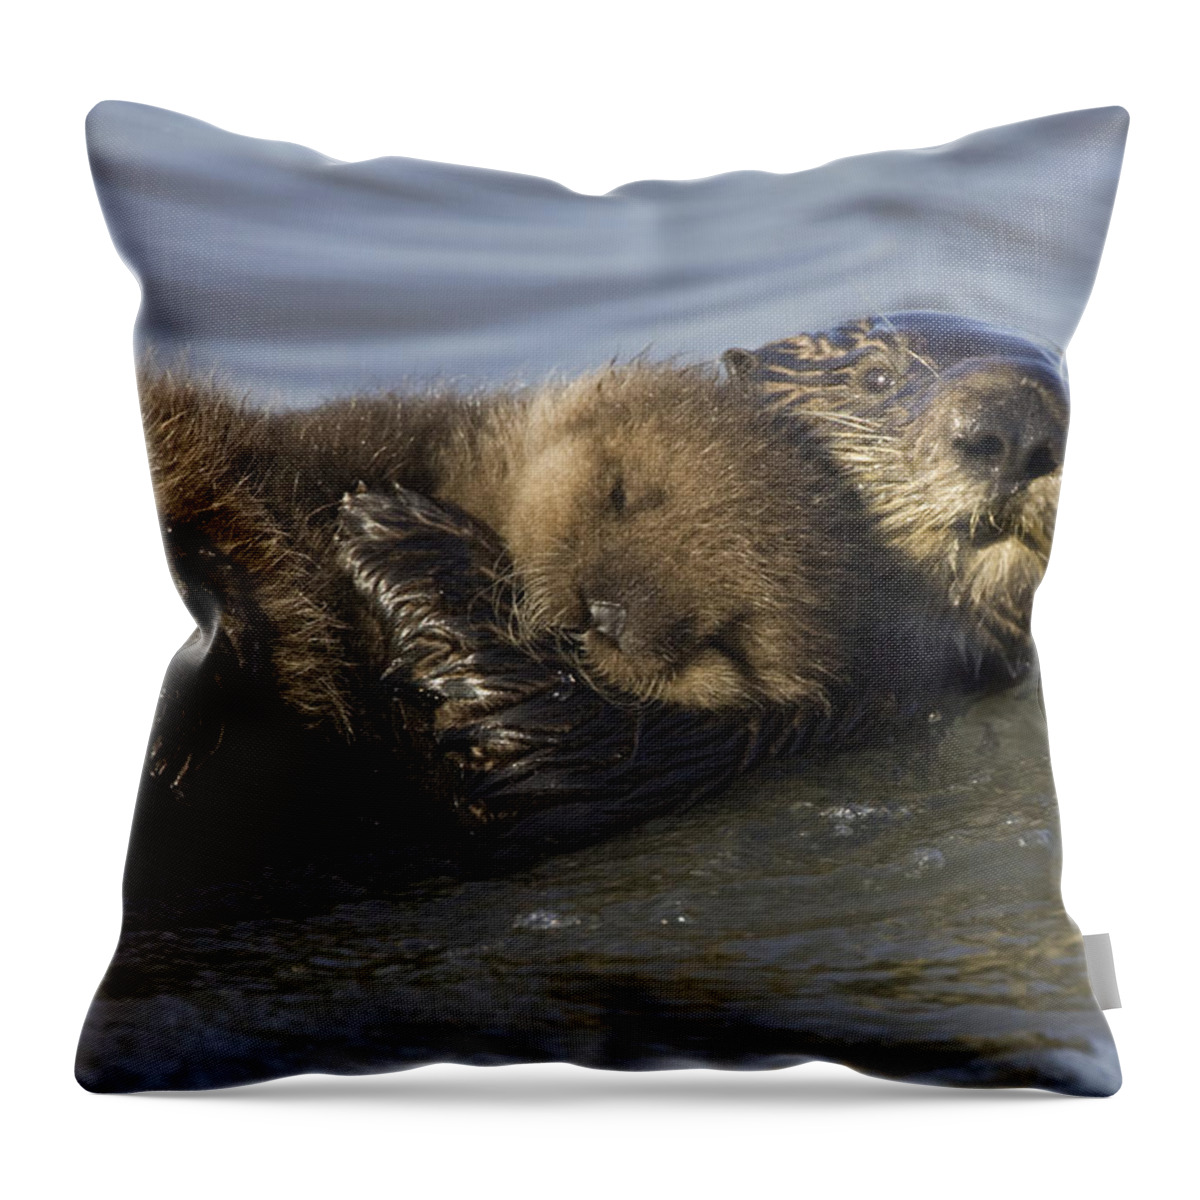 00438549 Throw Pillow featuring the photograph Sea Otter Mother With Pup Monterey Bay by Suzi Eszterhas